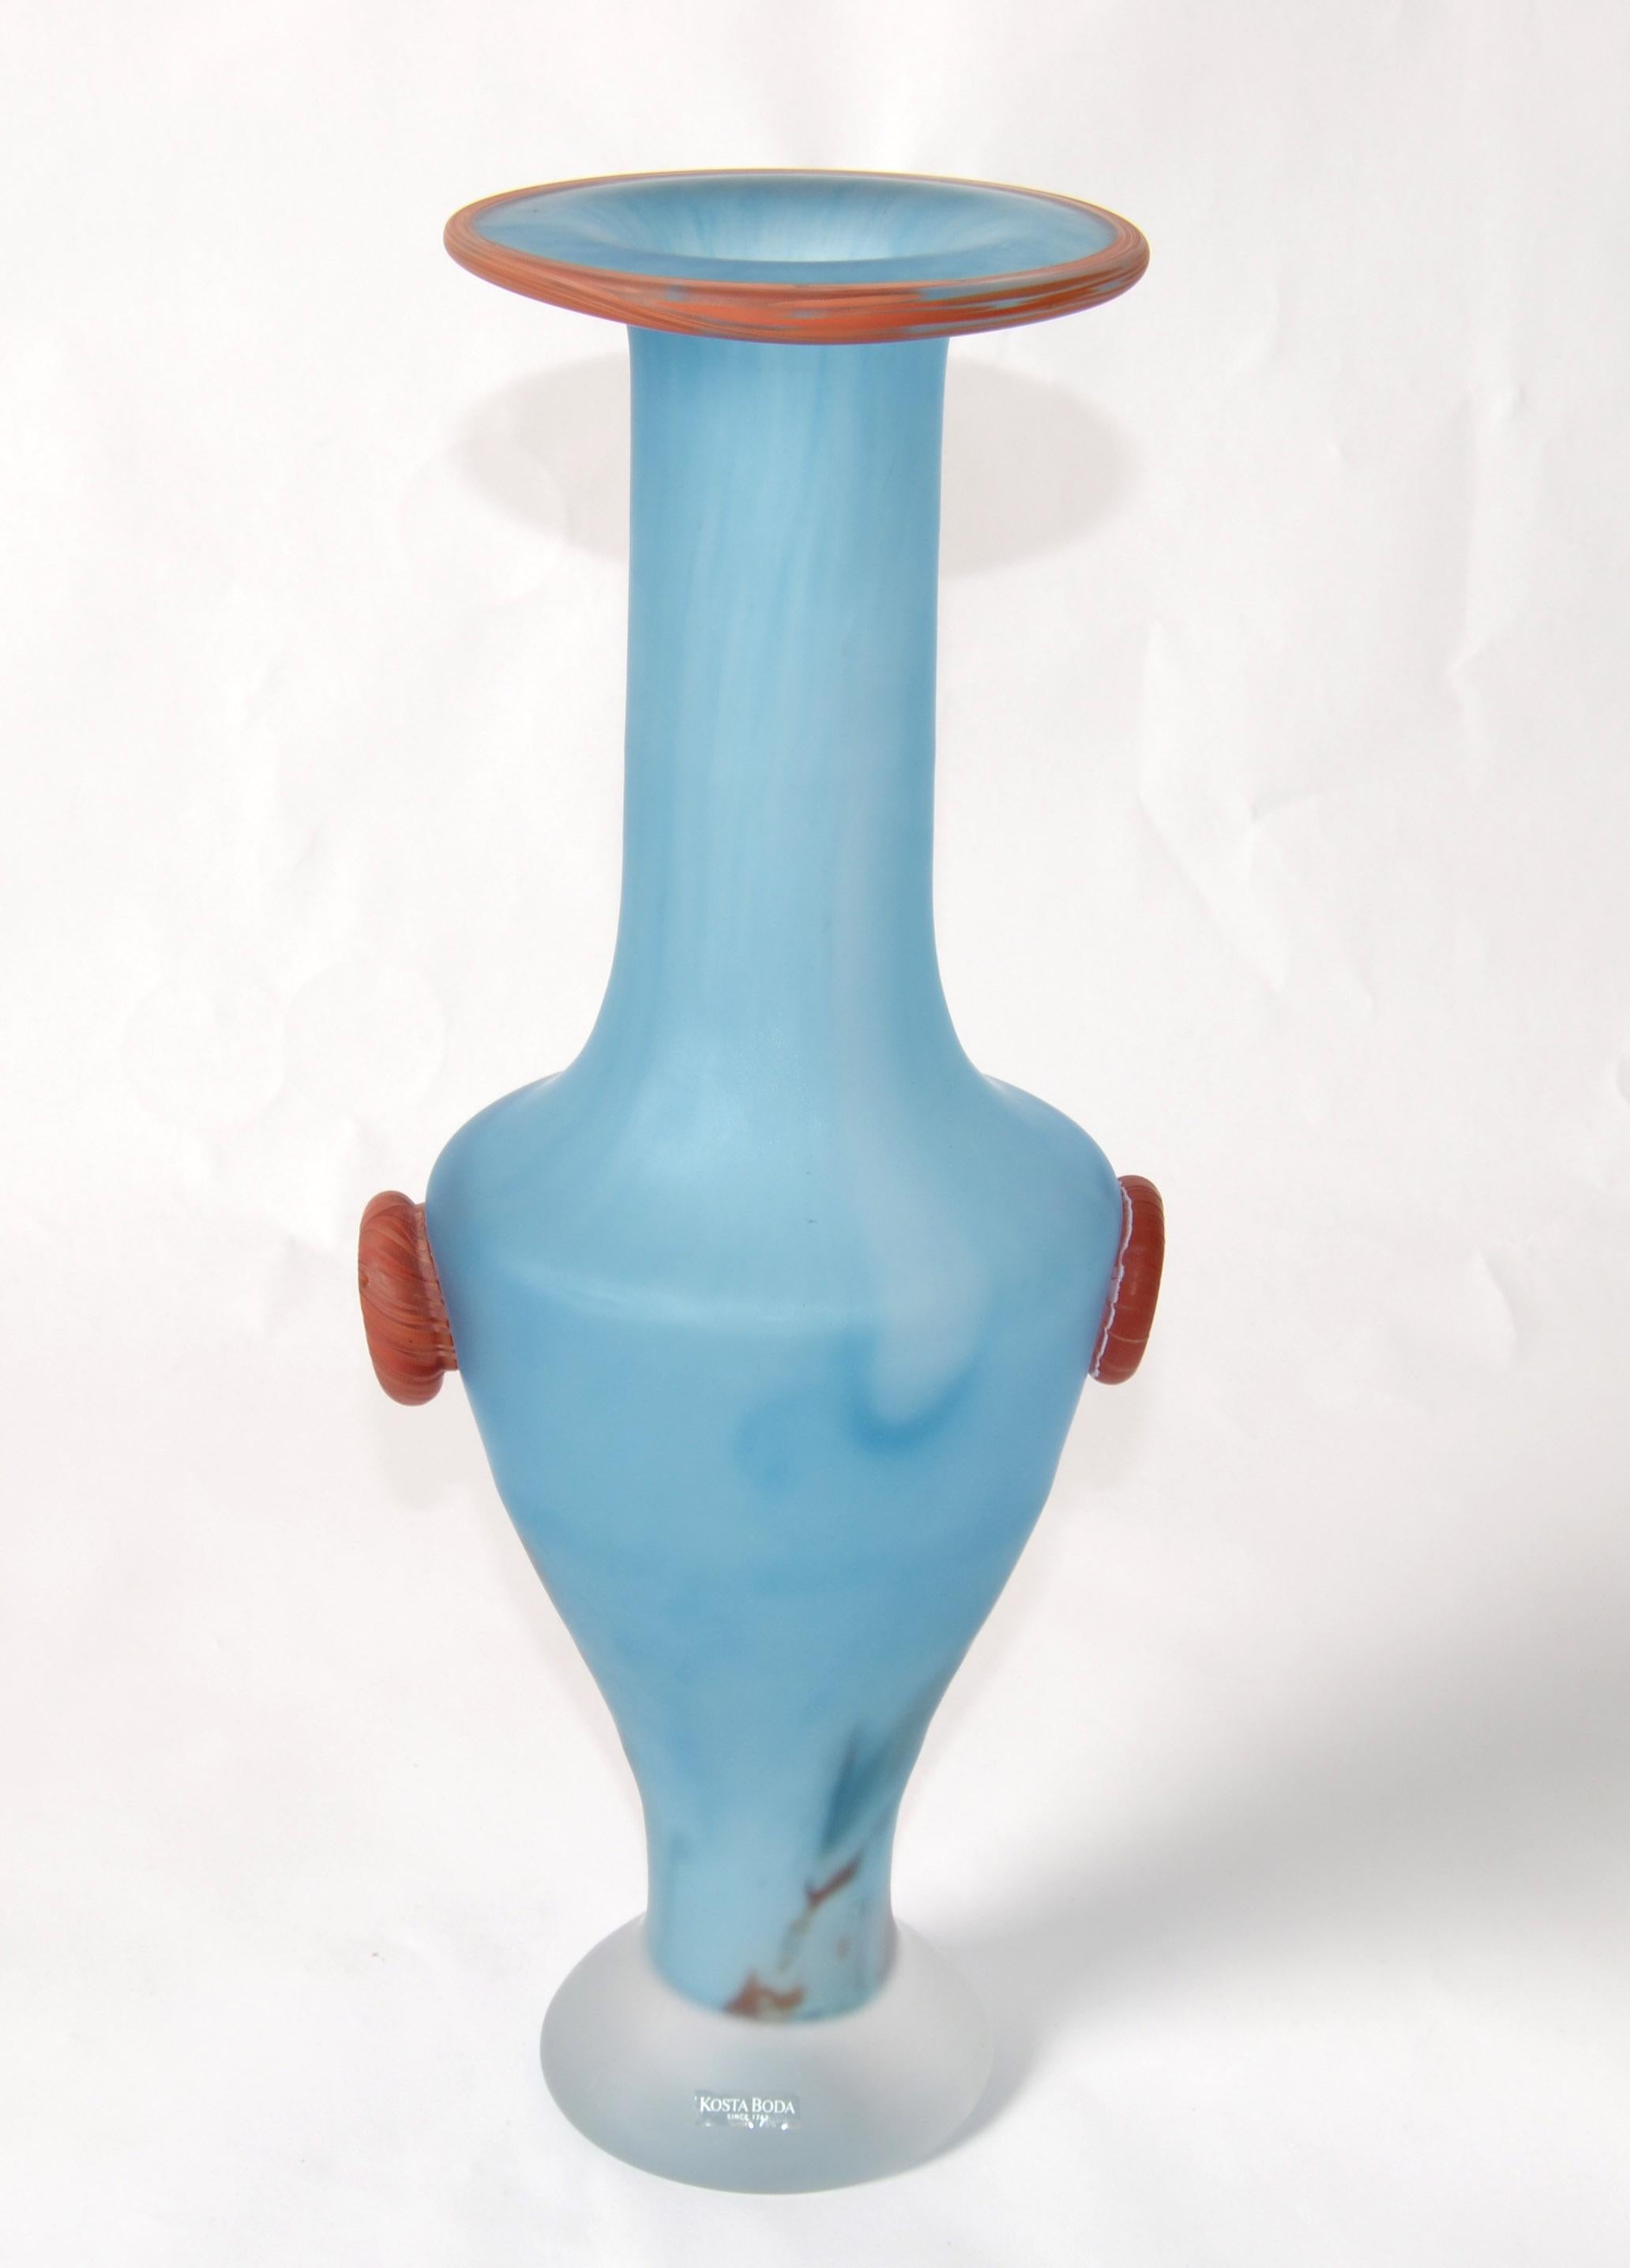 Scandinavian Modern Kosta Boda blown frosted glass vase, Vessel by Monica Backström Wedding Pandora Series. 
This blue frosted art glass vase features Bronze Rose accents with a wide rim, tapered neck, and footed base.
Makers Mark at the base and